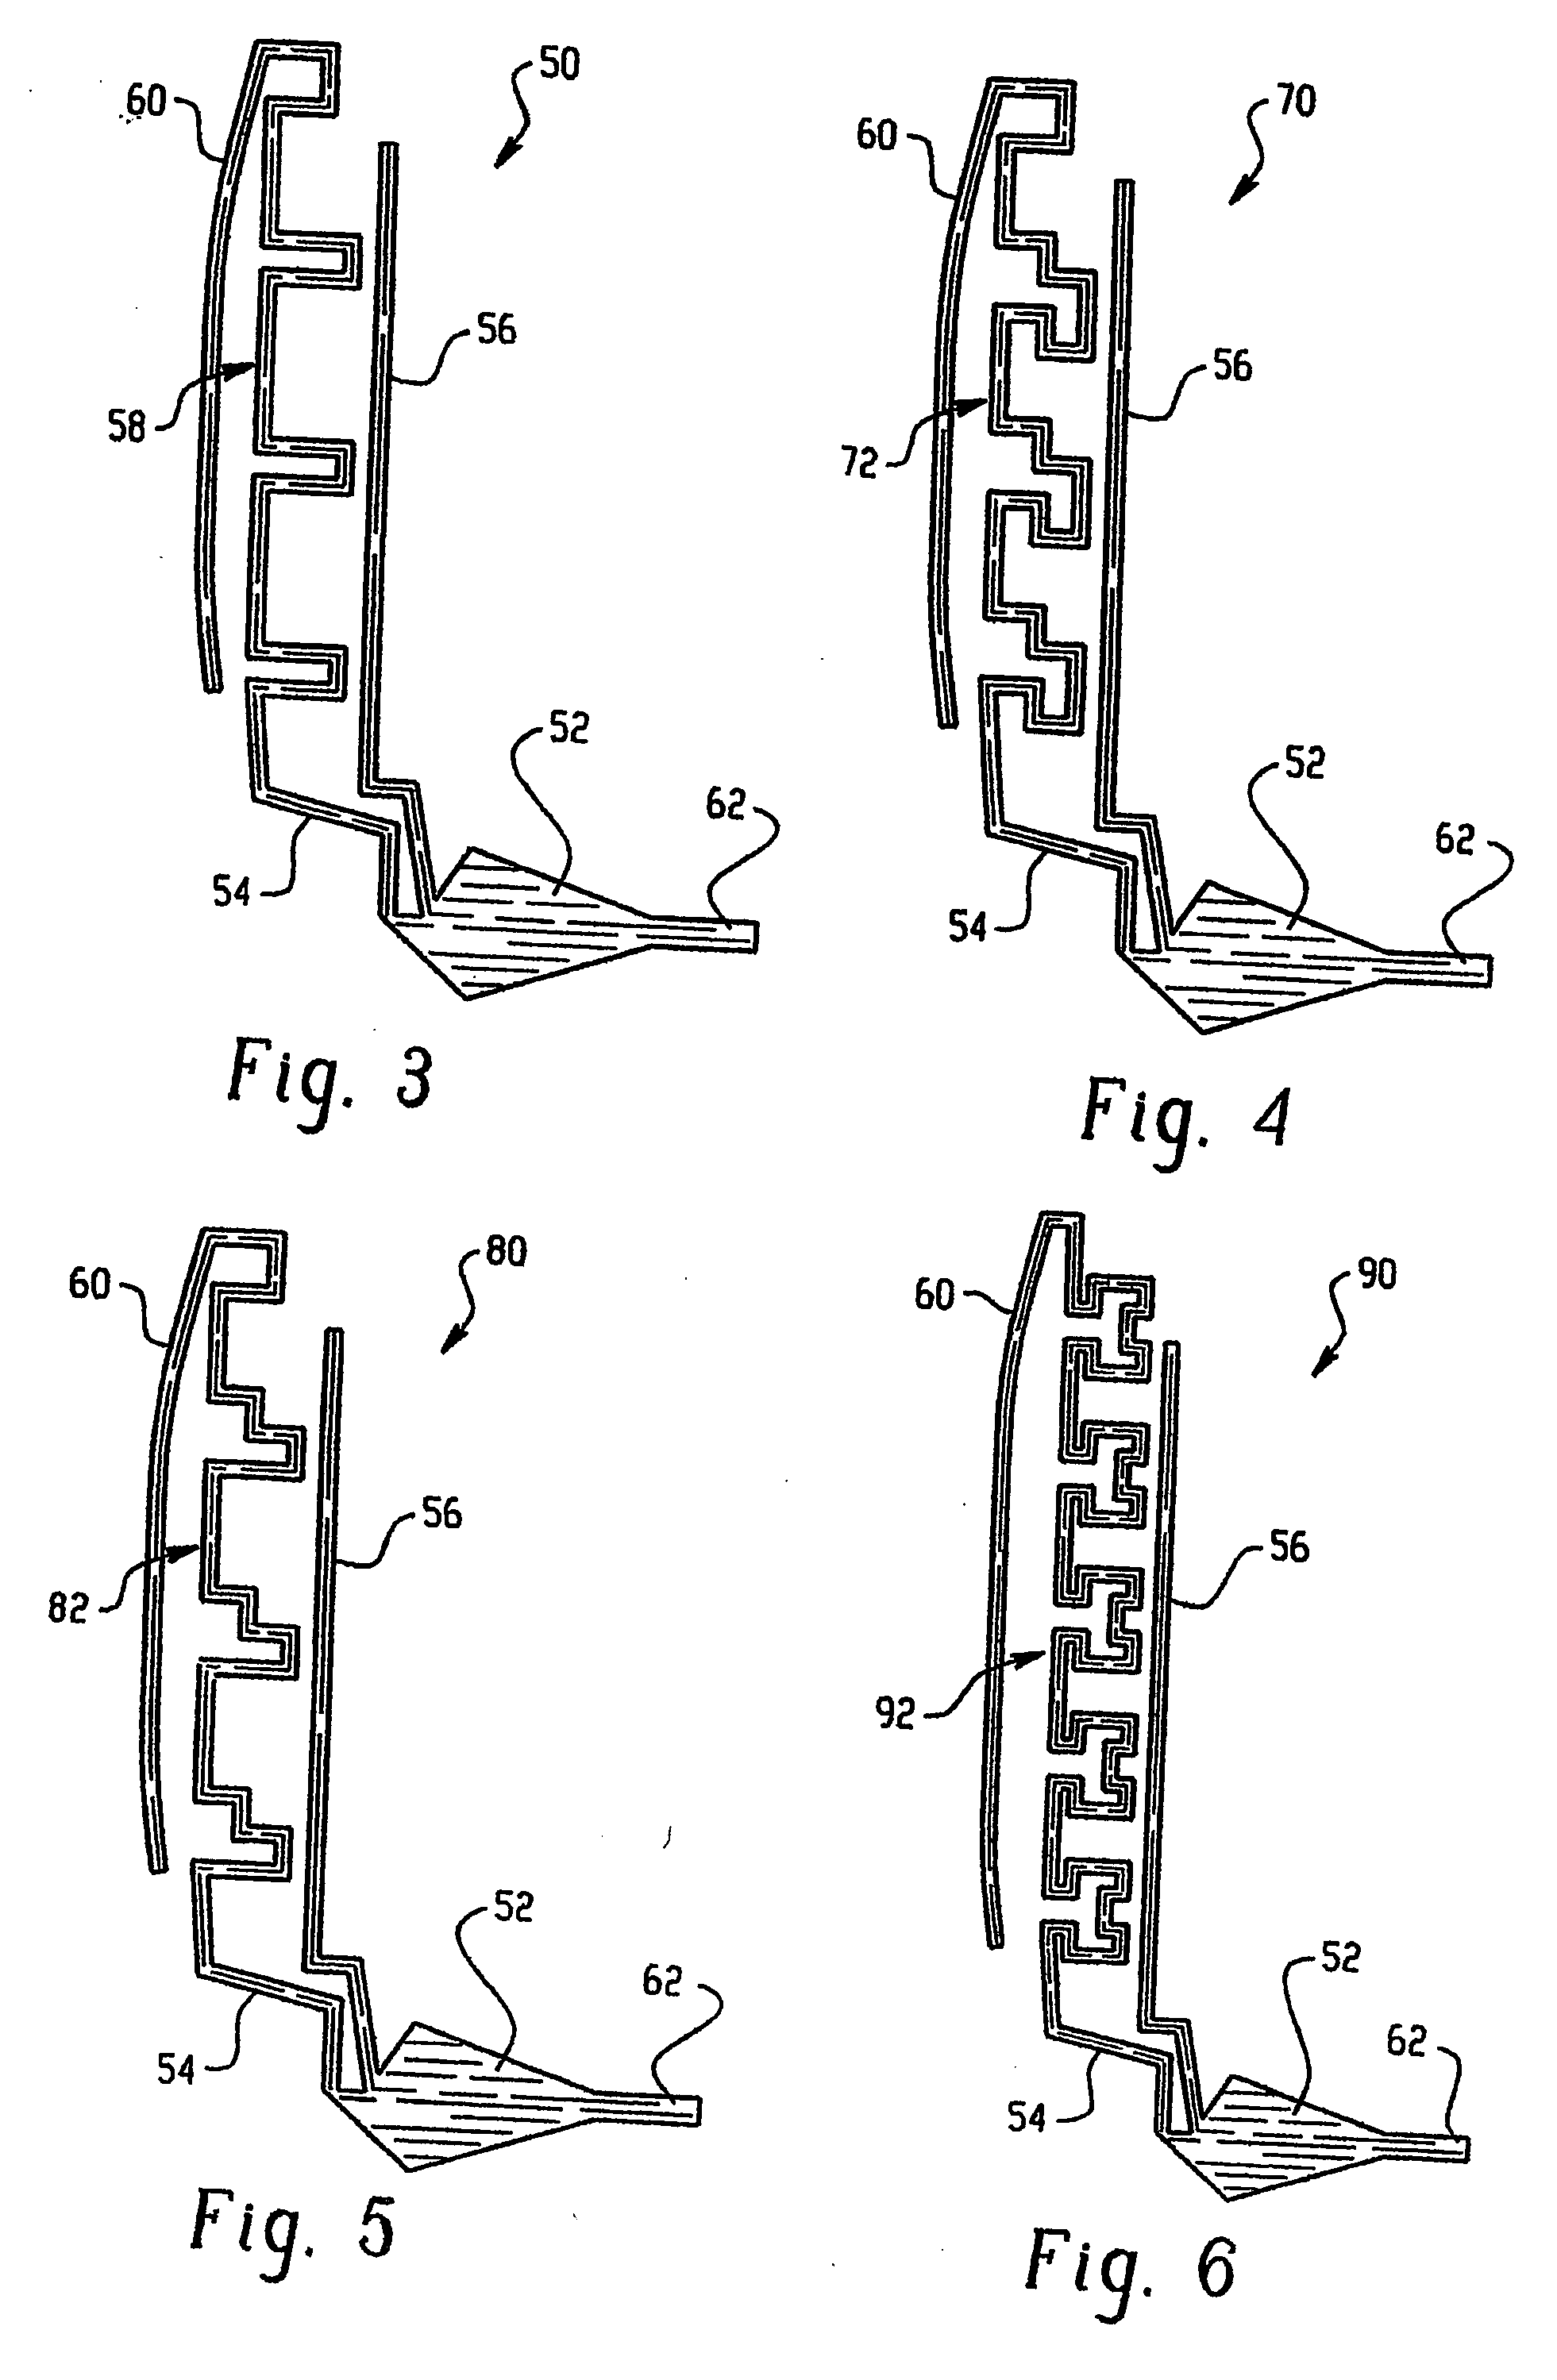 Multi-band monopole antenna for a mobile communications device